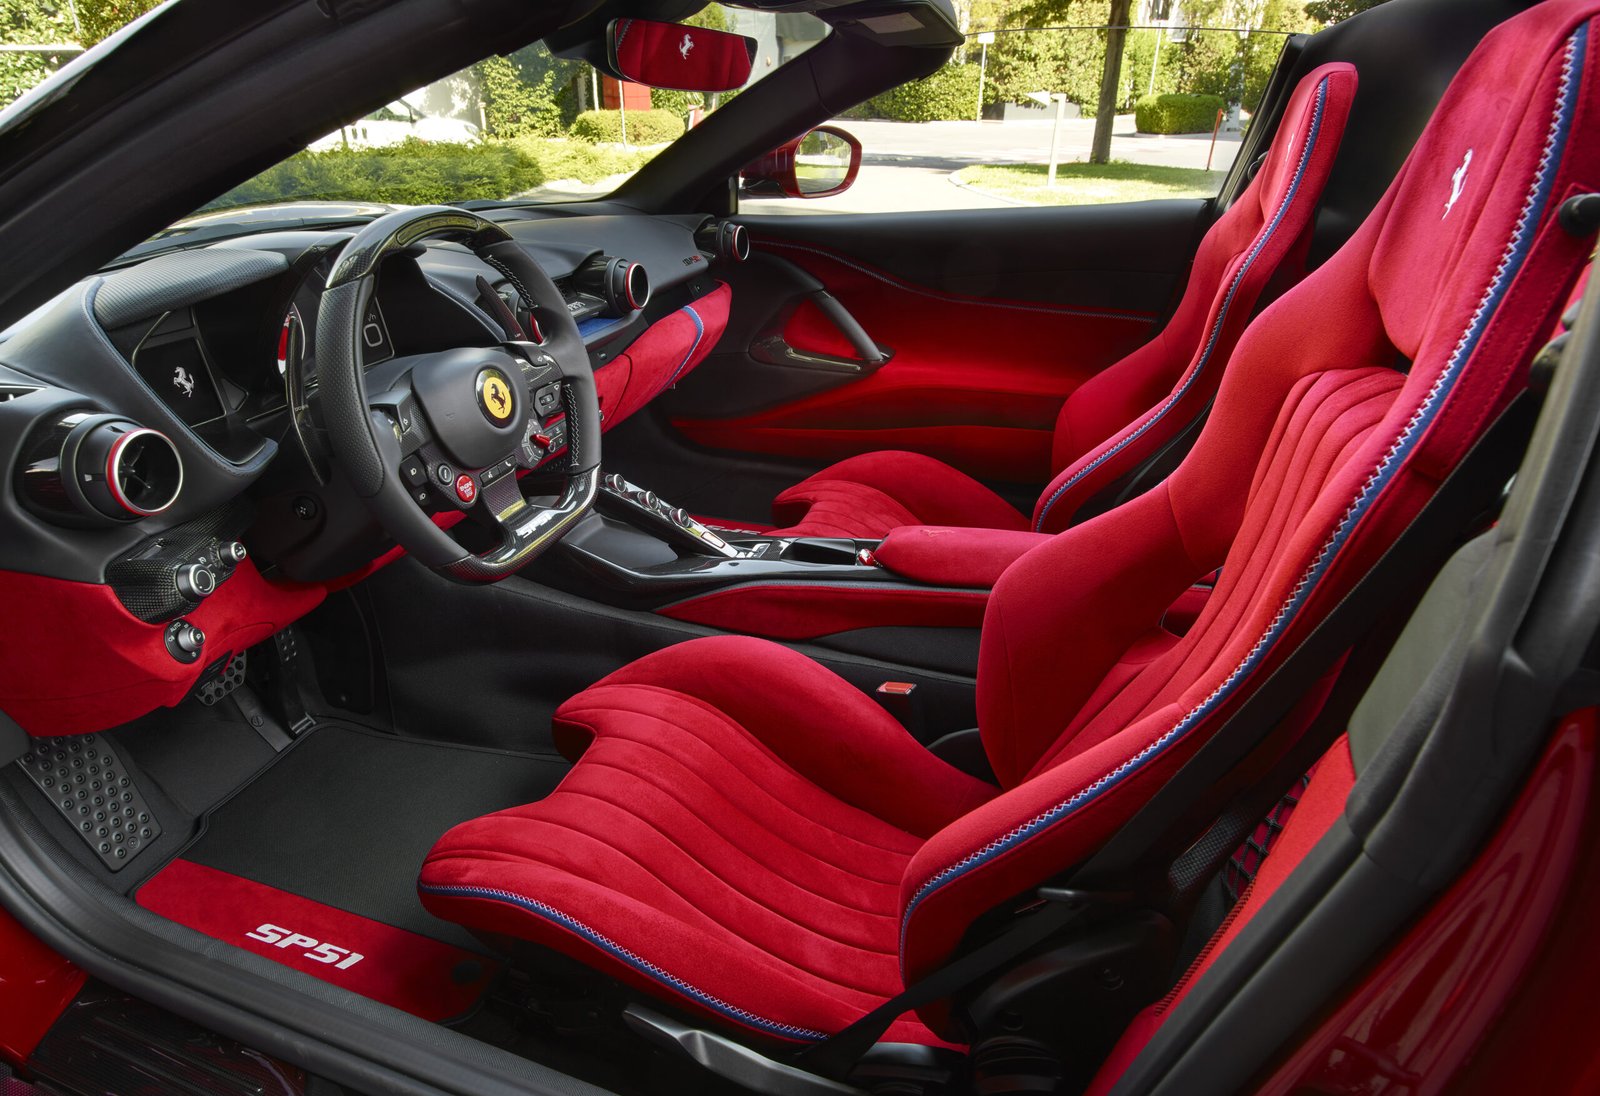 FERRARI SP51: THE 812 GTS-INSPIRED ROADSTER IS MARANELLO’S LATEST ONE-OFF